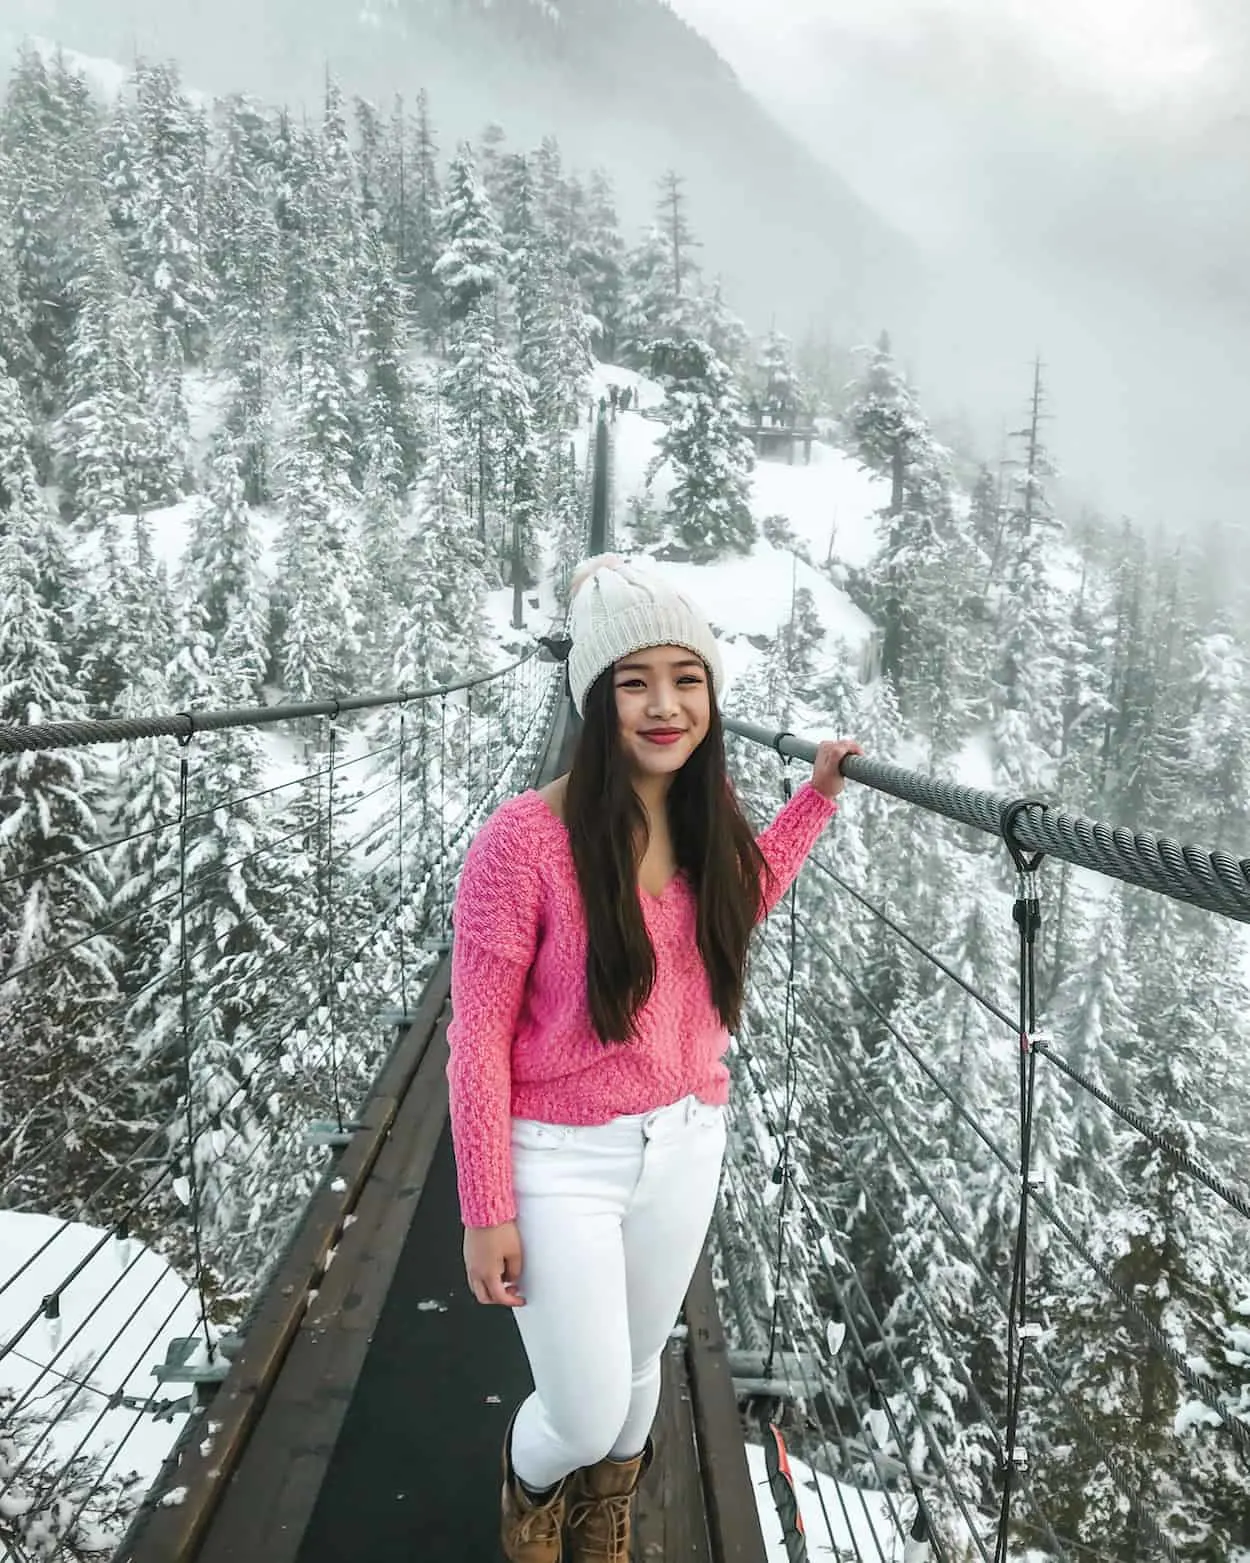 A snowy winter view from the top of the Sea to Sky Gondola in Squamish, British Columbia